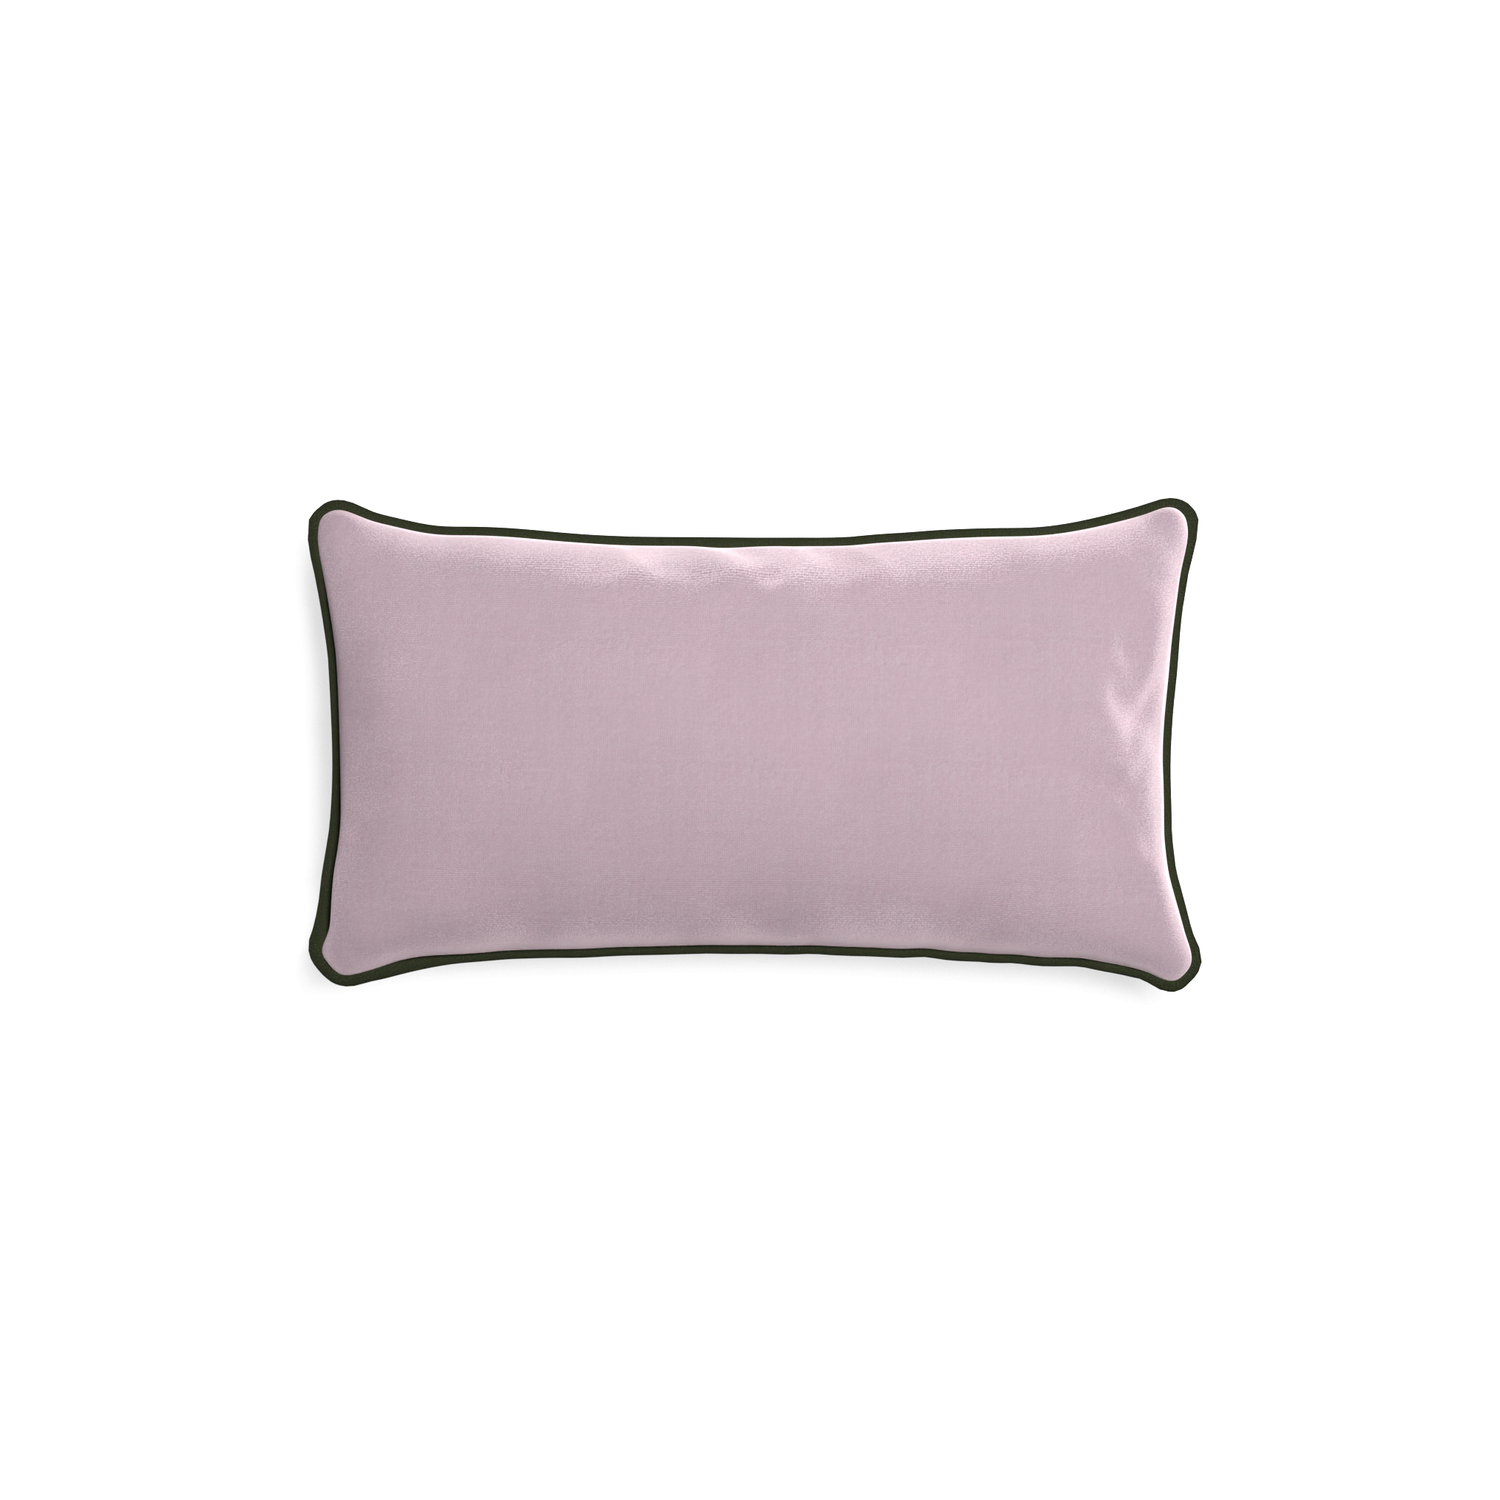 rectangle lilac velvet pillow with fern green piping